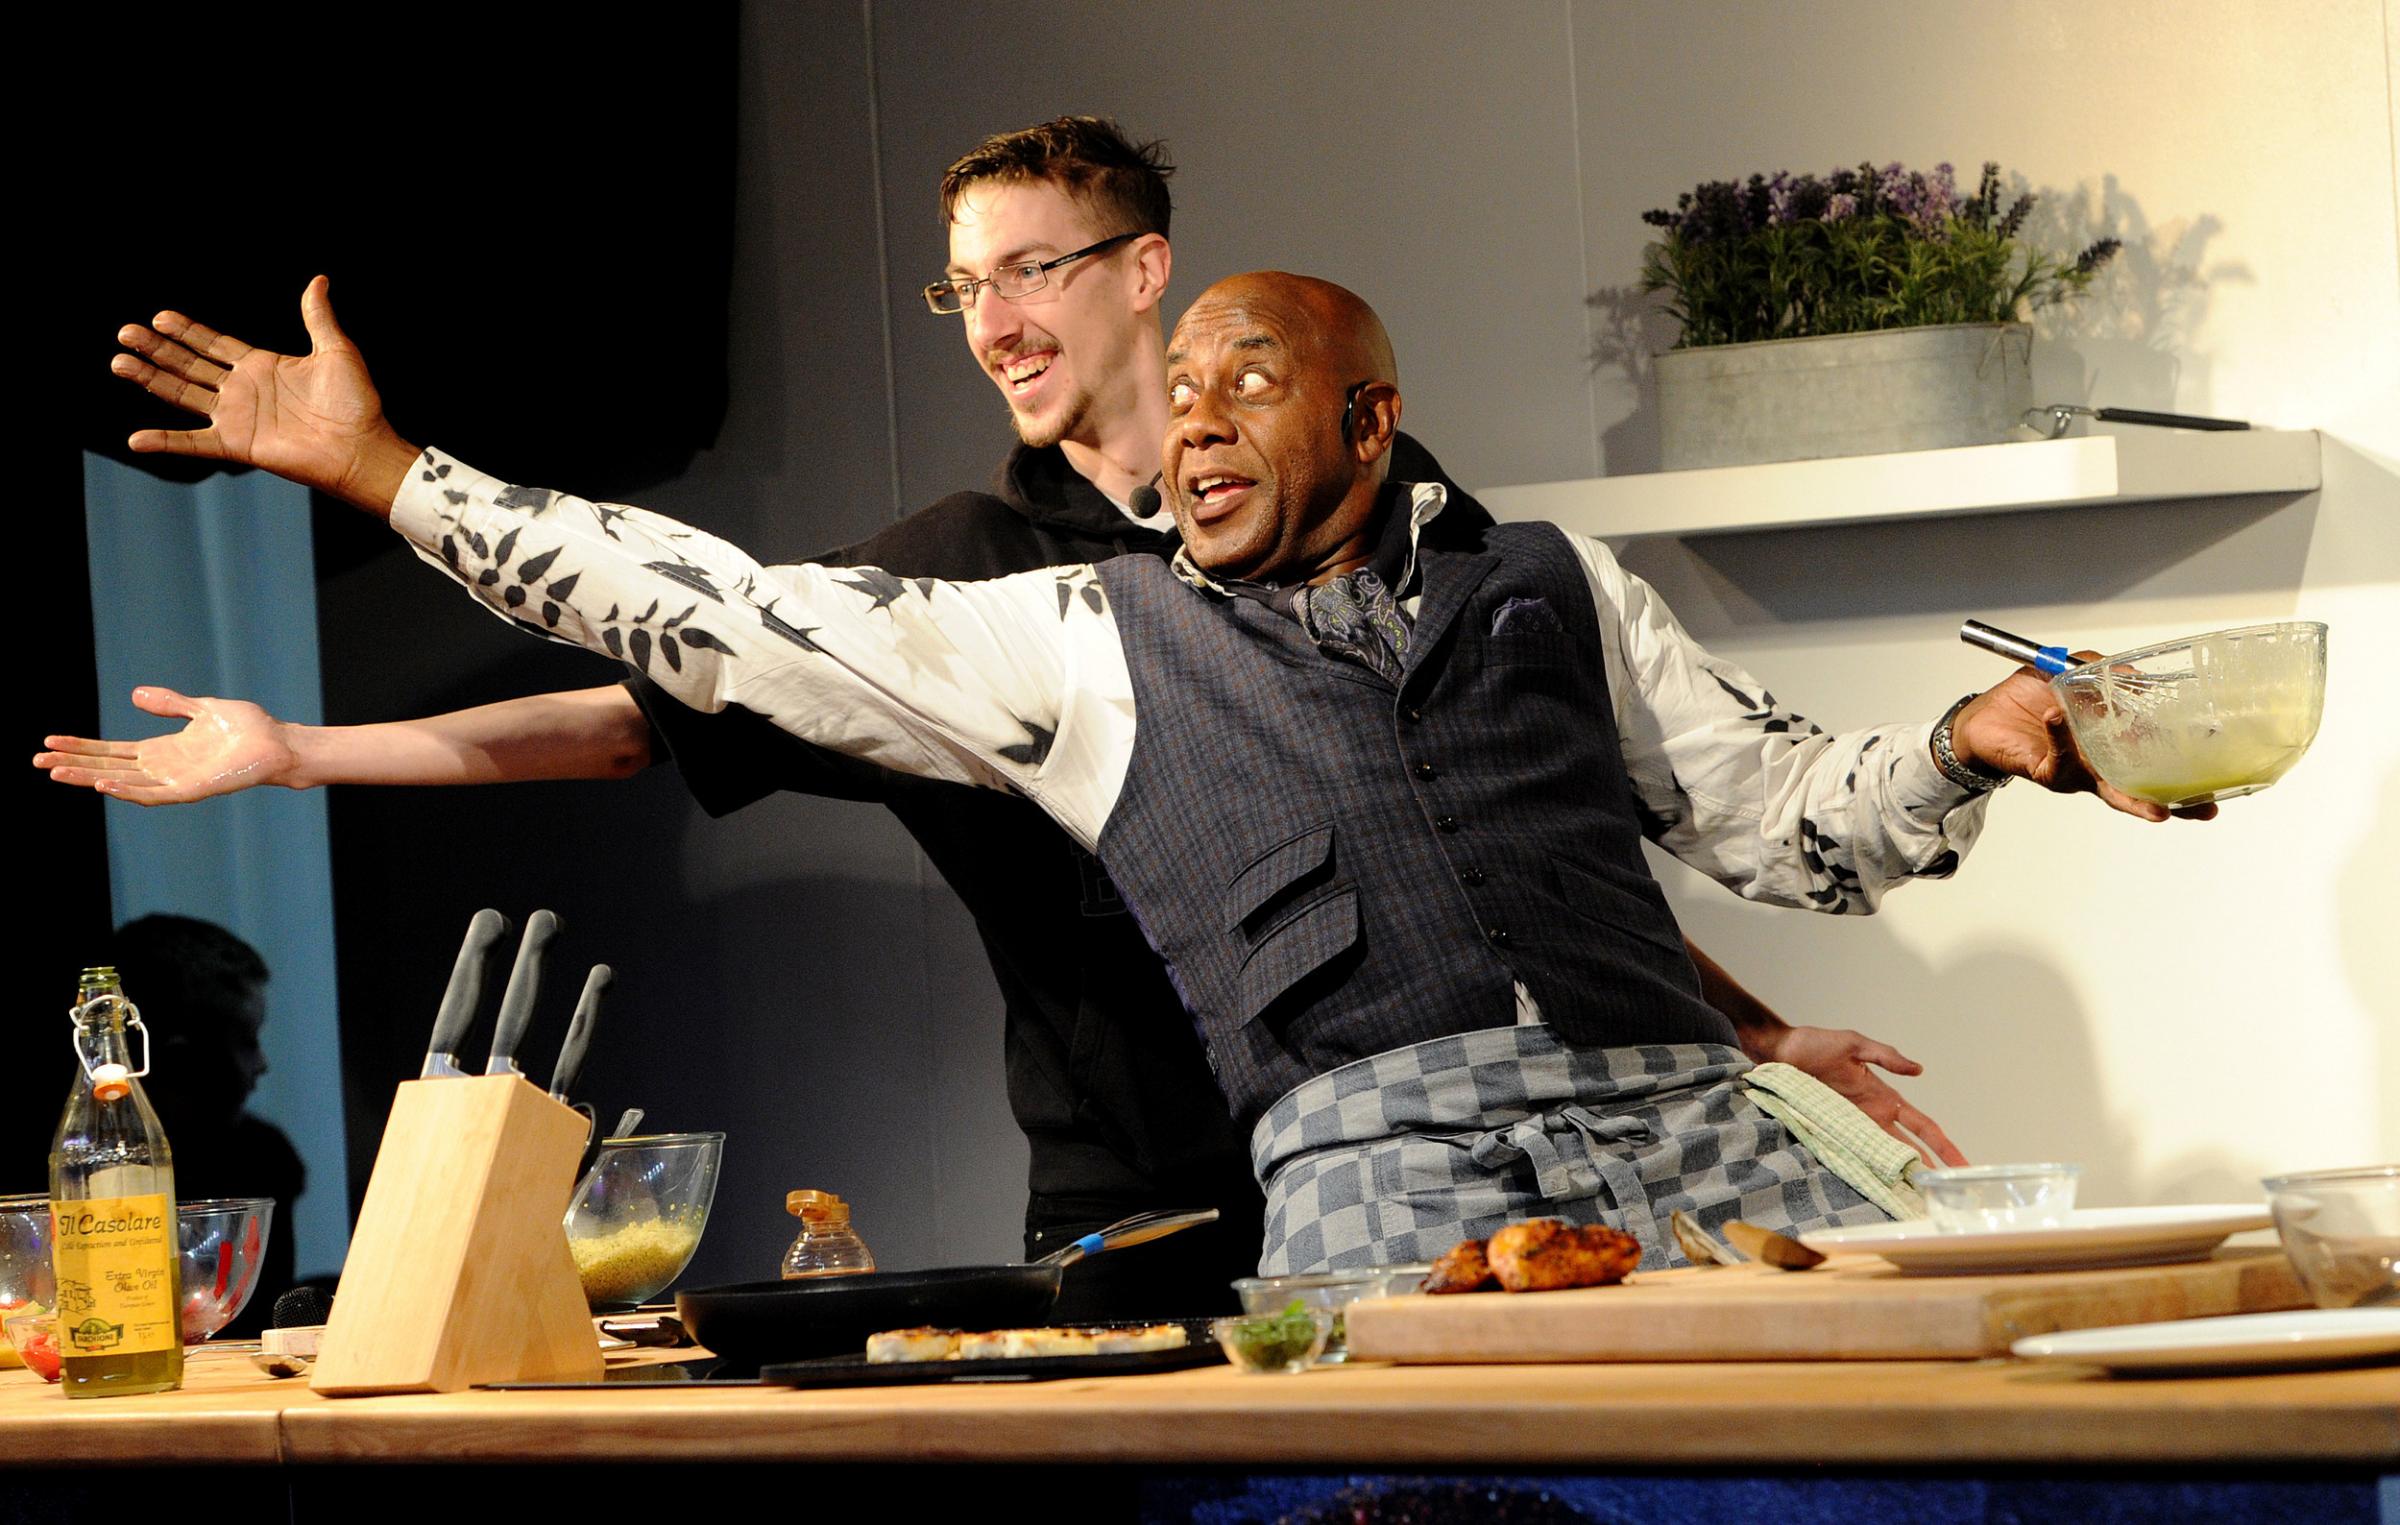 Day three of the annual Bolton Food and Drink Festival featured appearances from celebrity chefs Ainsley Harriott, Andrew Nutter and Simon Wood. Ainsley Harriott has fun during his demonstration with Bolton man Neil. Picture by Paul Heyes, Saturday